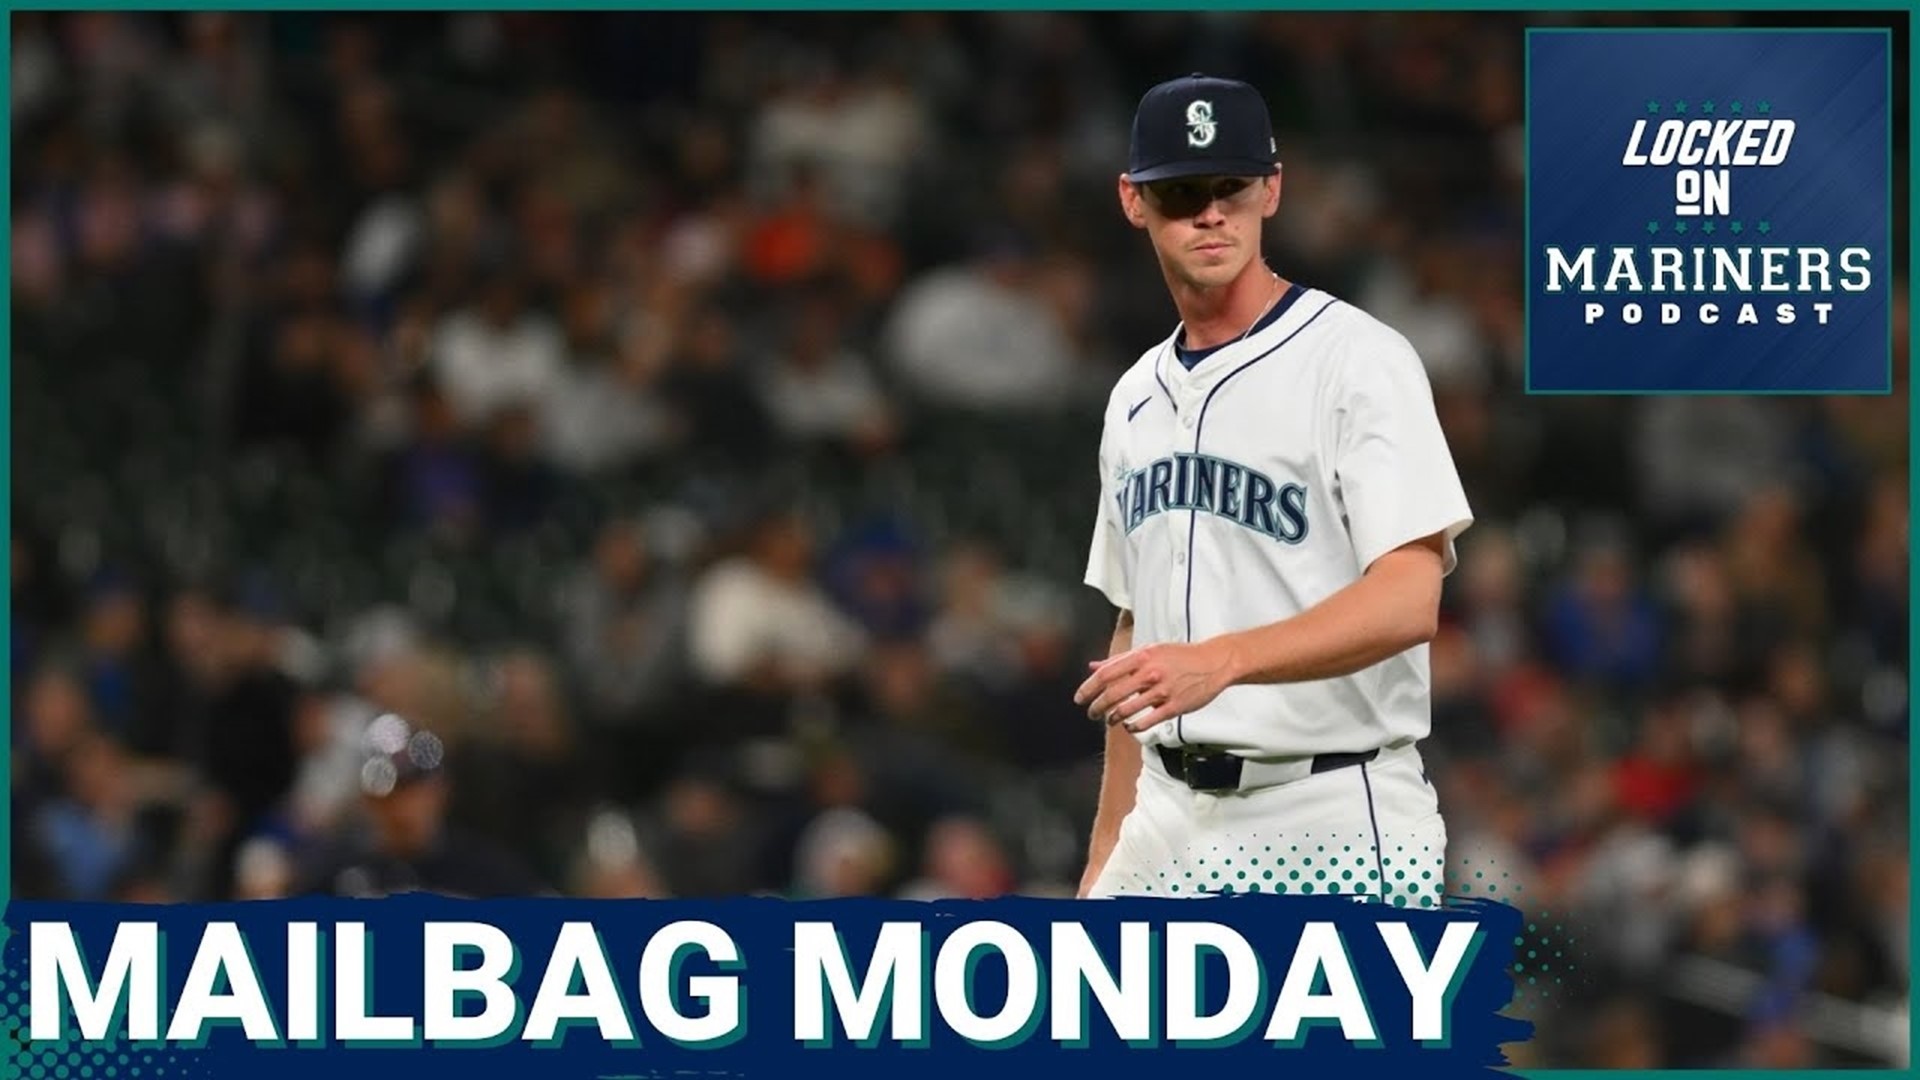 It's Mailbag Monday! Ty and Colby answer some of your Mariners questions, including if it's time to give up on Emerson Hancock as a starter.